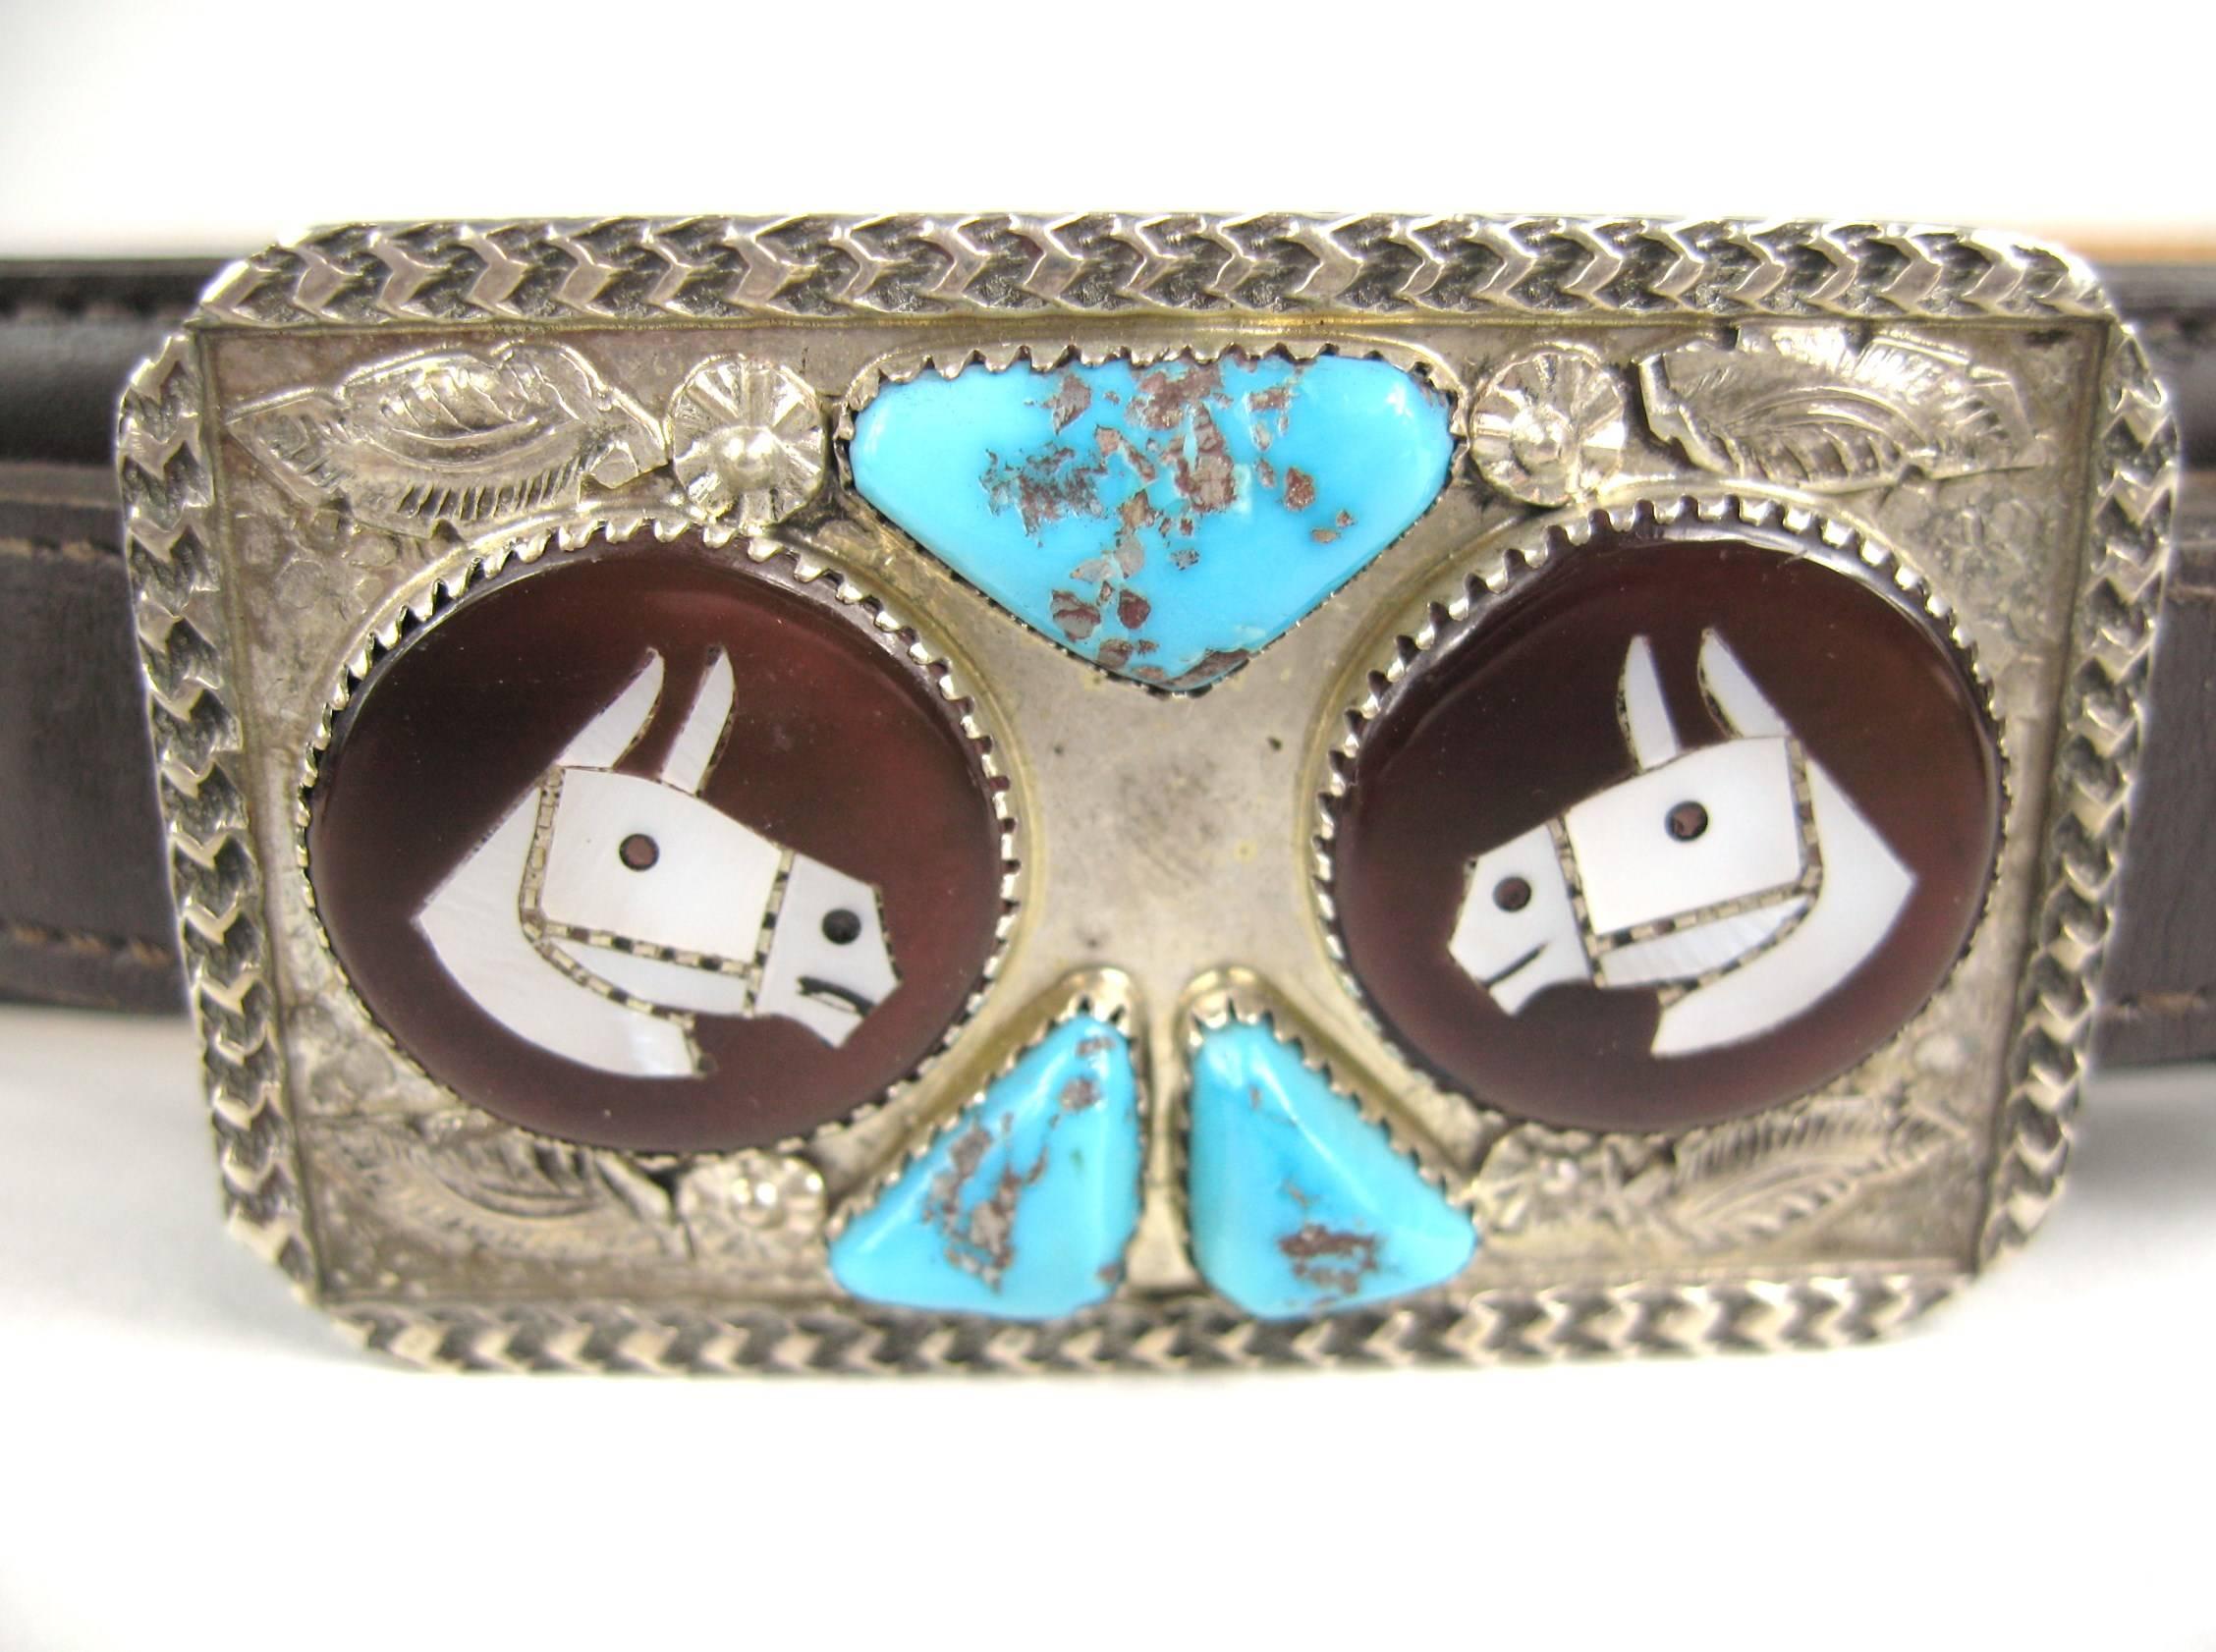 Here you have a Sterling Silver Multi Gemstone Horse Belt Buckle with features Turquoise, Jet and Mother of Pearl on a Leather Dan Post Belt. Belt is a 30. Buckle measures 2.25 inches wide x 1.40 inches. Belt measures 1.15 inches wide x 36.25 inches